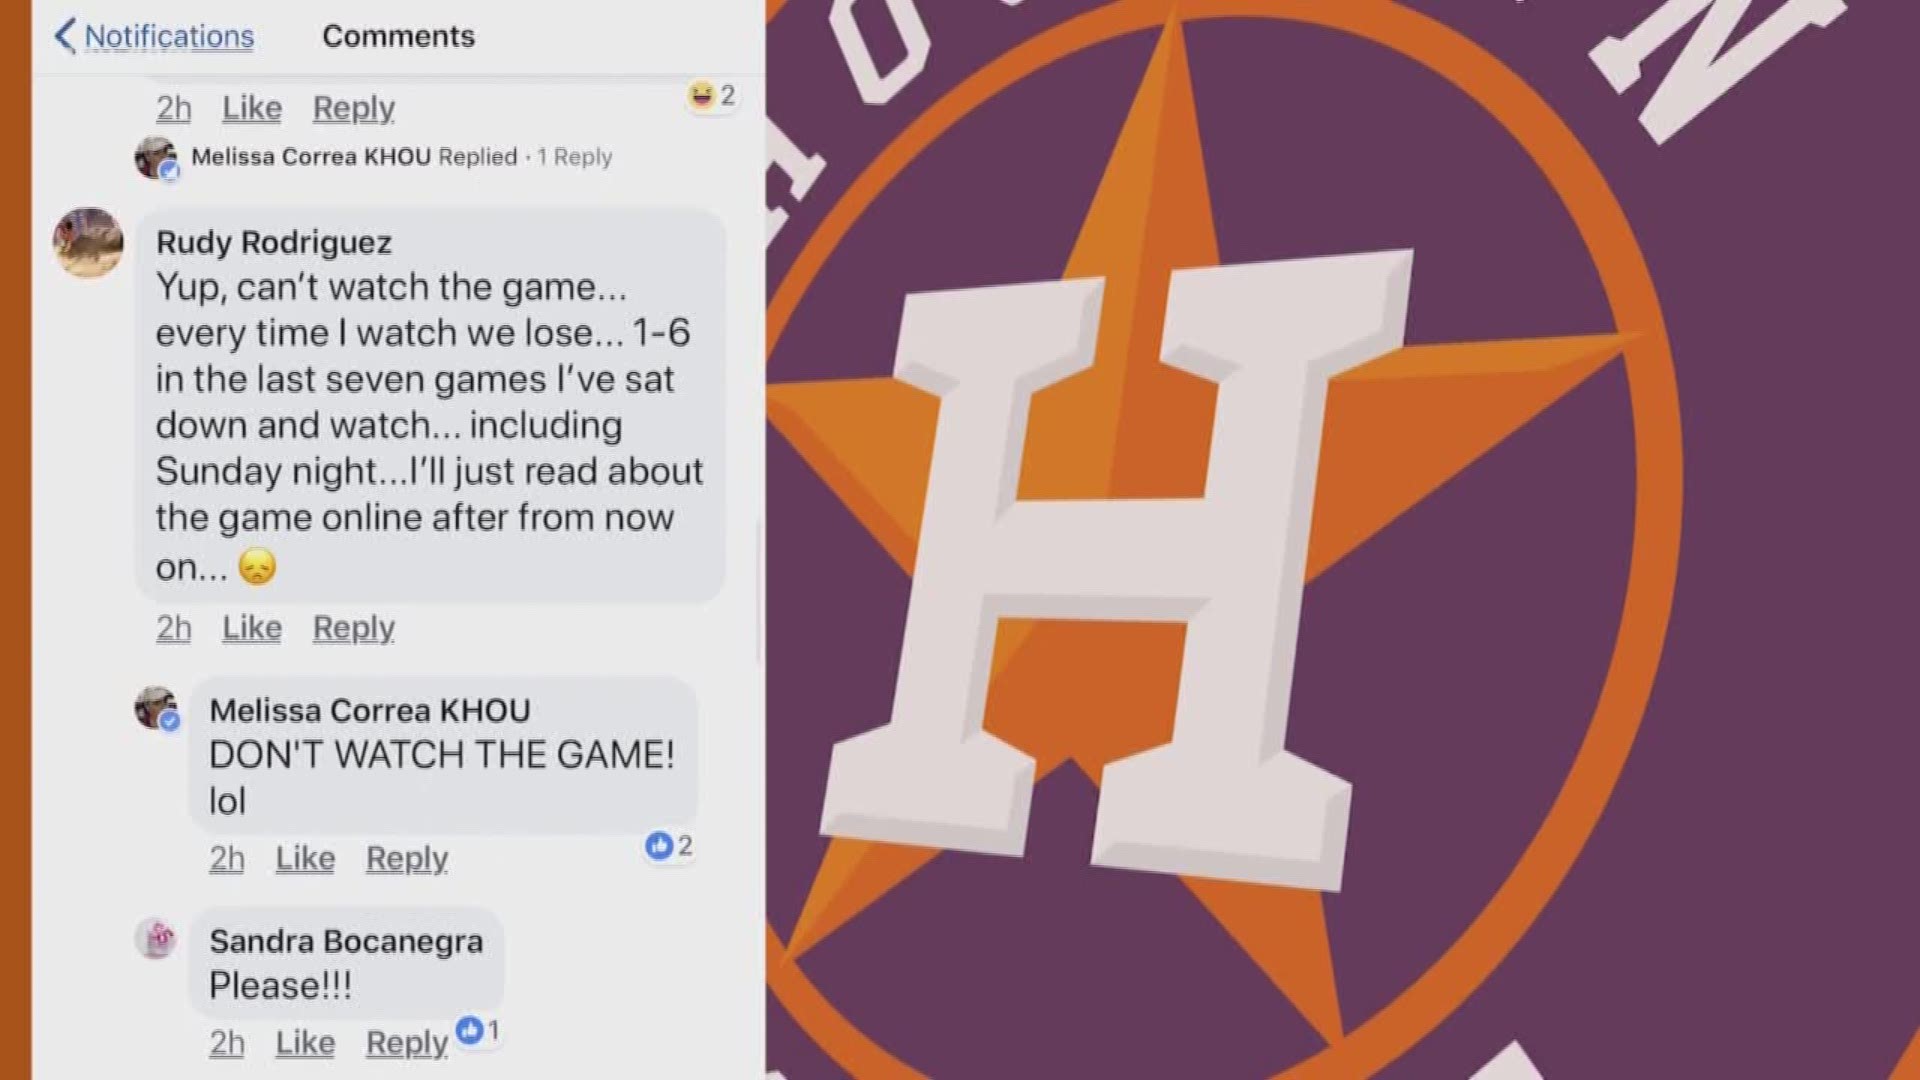 The Astros are looking to tie the series 2-2, and for some fans that means putting superstitions into overdrive.